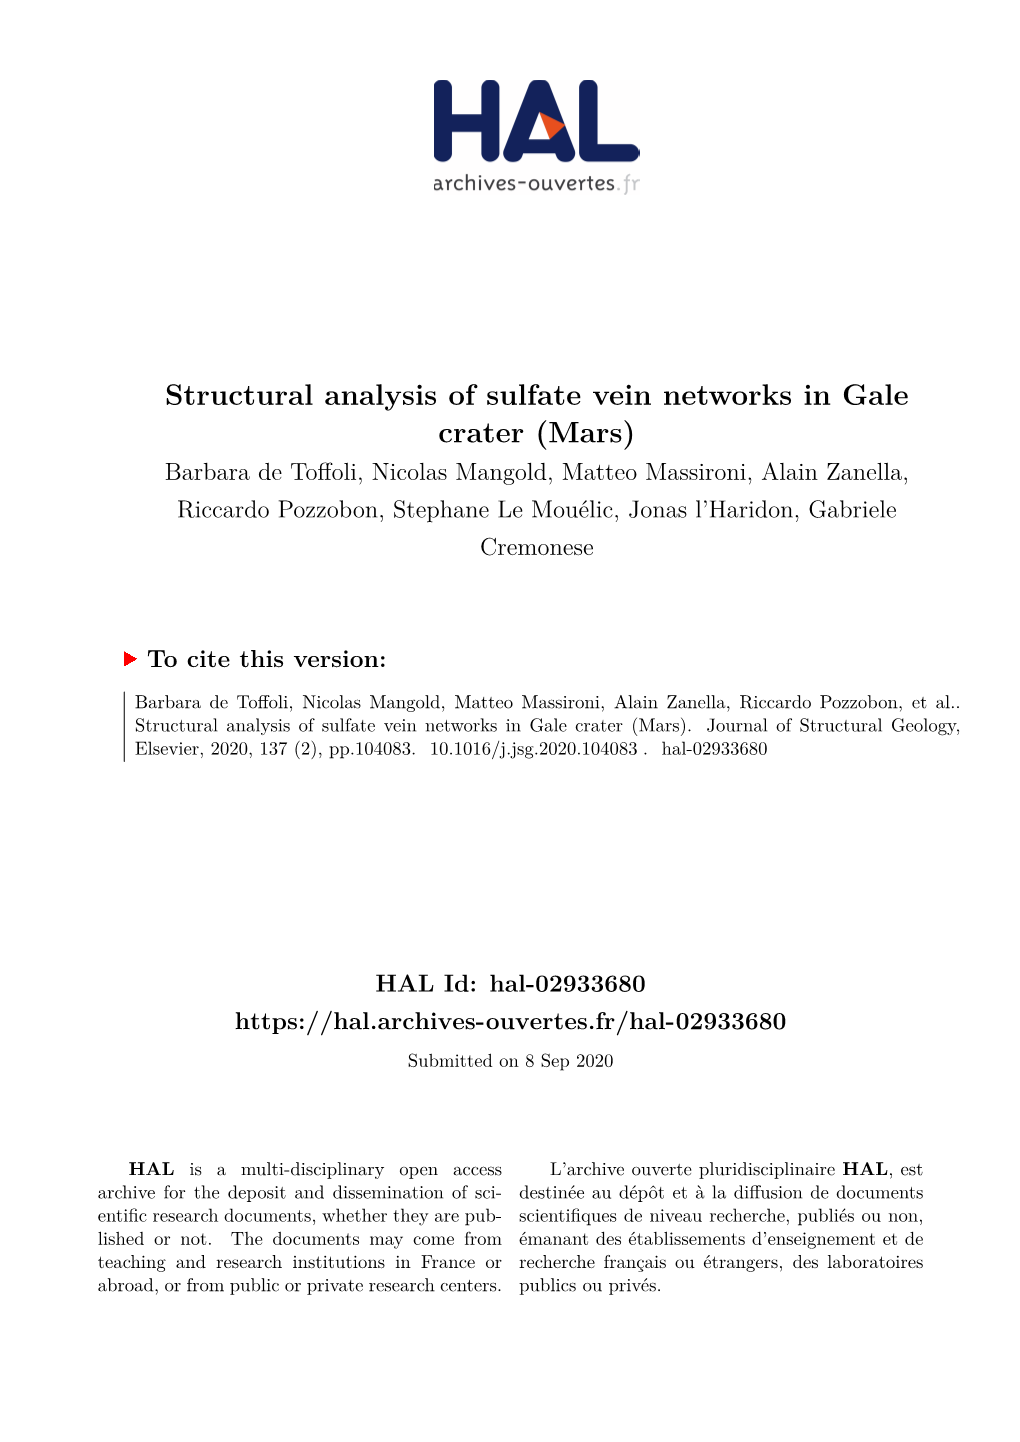 Structural Analysis of Sulfate Vein Networks in Gale Crater (Mars)